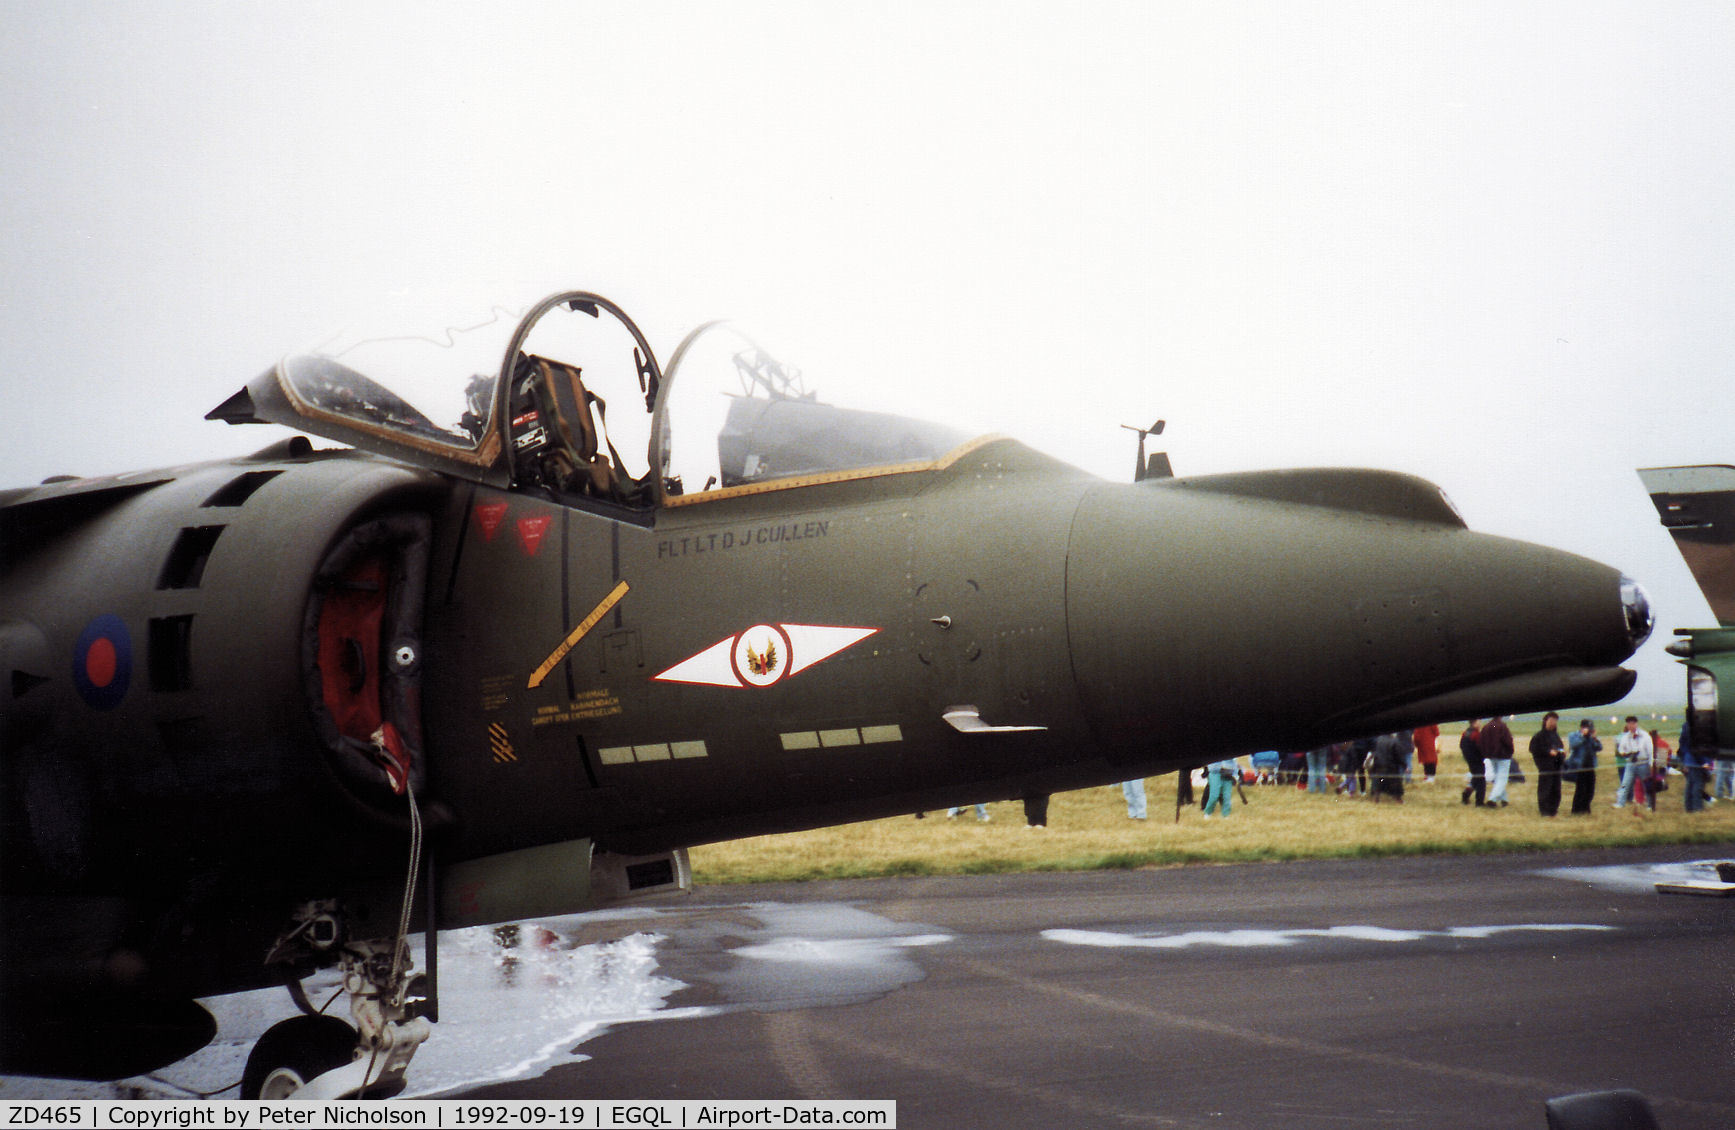 ZD465, 1990 British Aerospace Harrier GR.7 C/N P55, Harrier GR.7 of 1 Squadron at RAF Wittering on display at the 1992 RAF Leuchars Airshow.